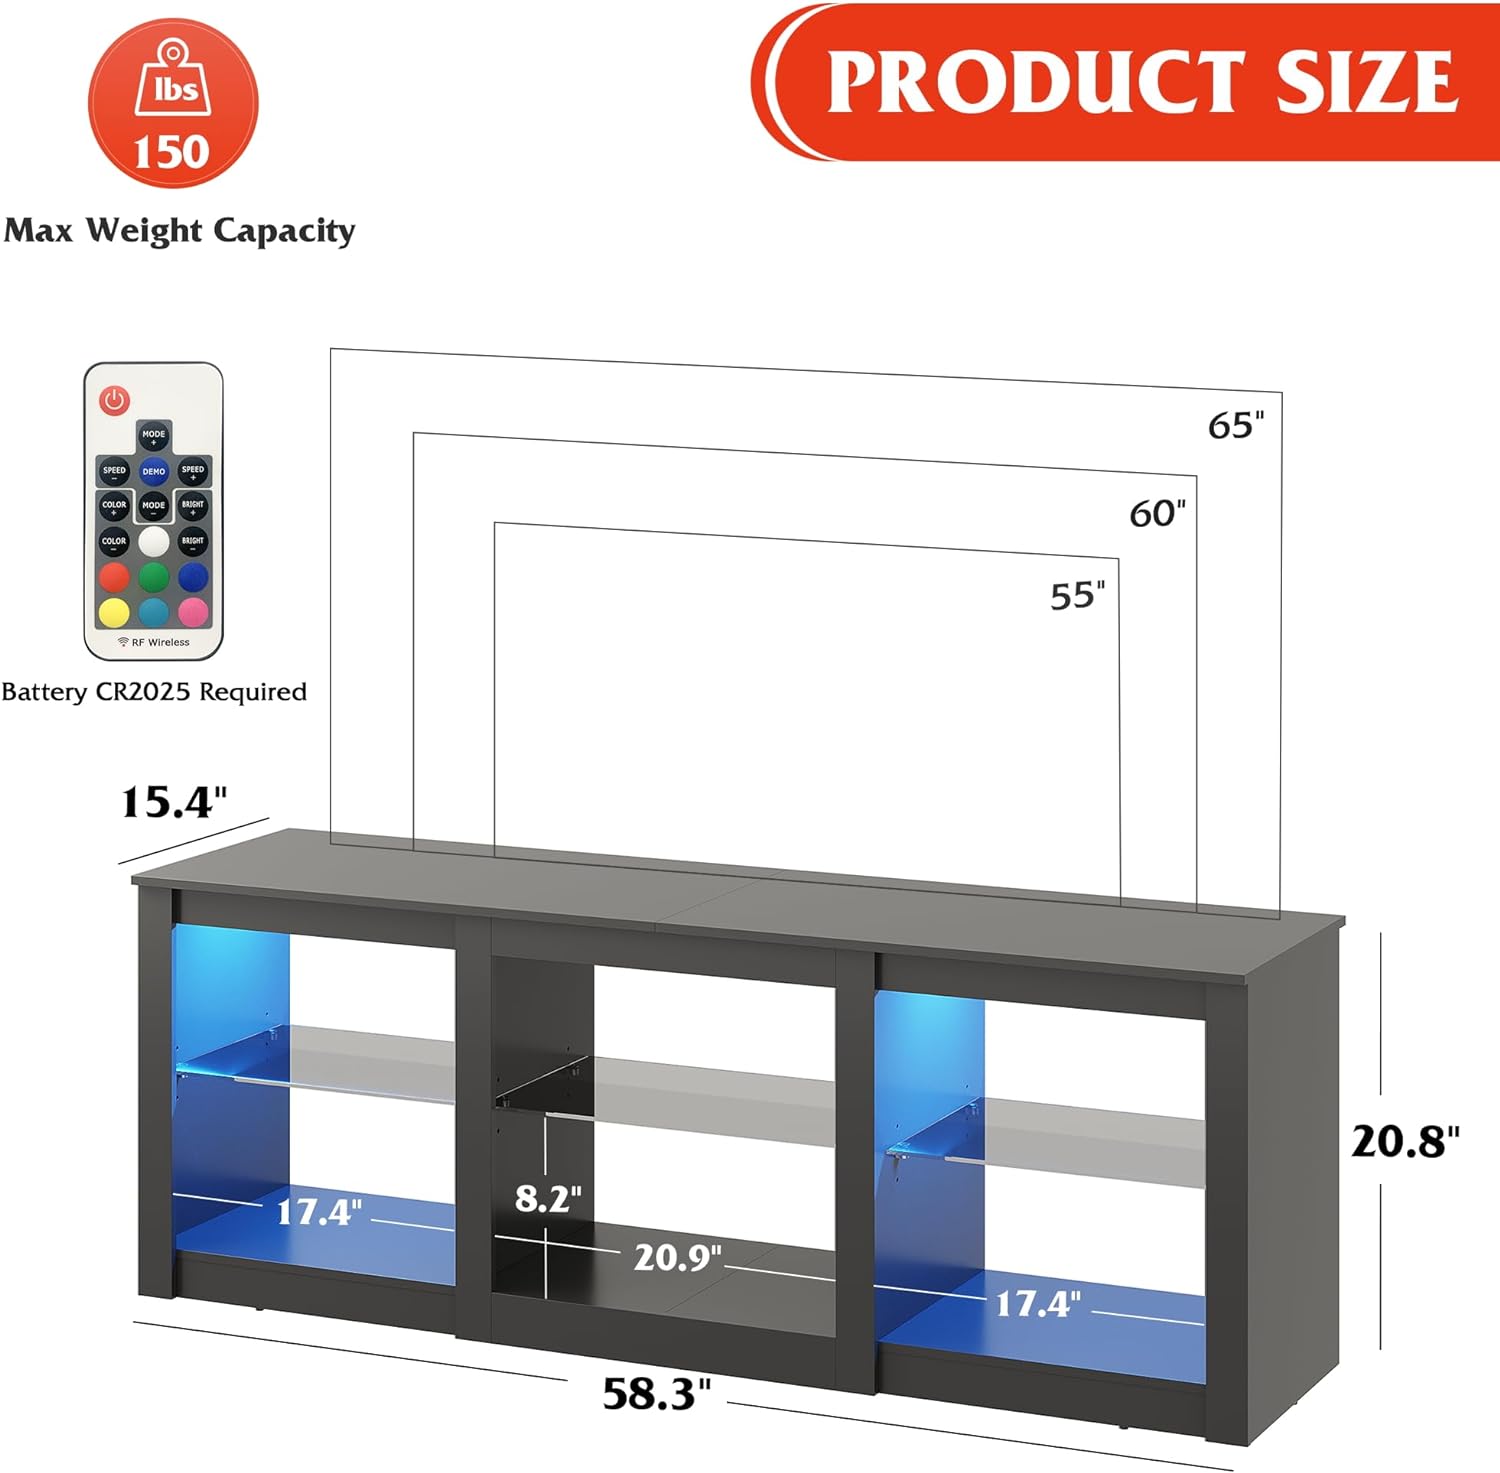 WLIVE TV Stand with LED Lights for TVs up to 65 inch, Black - $75